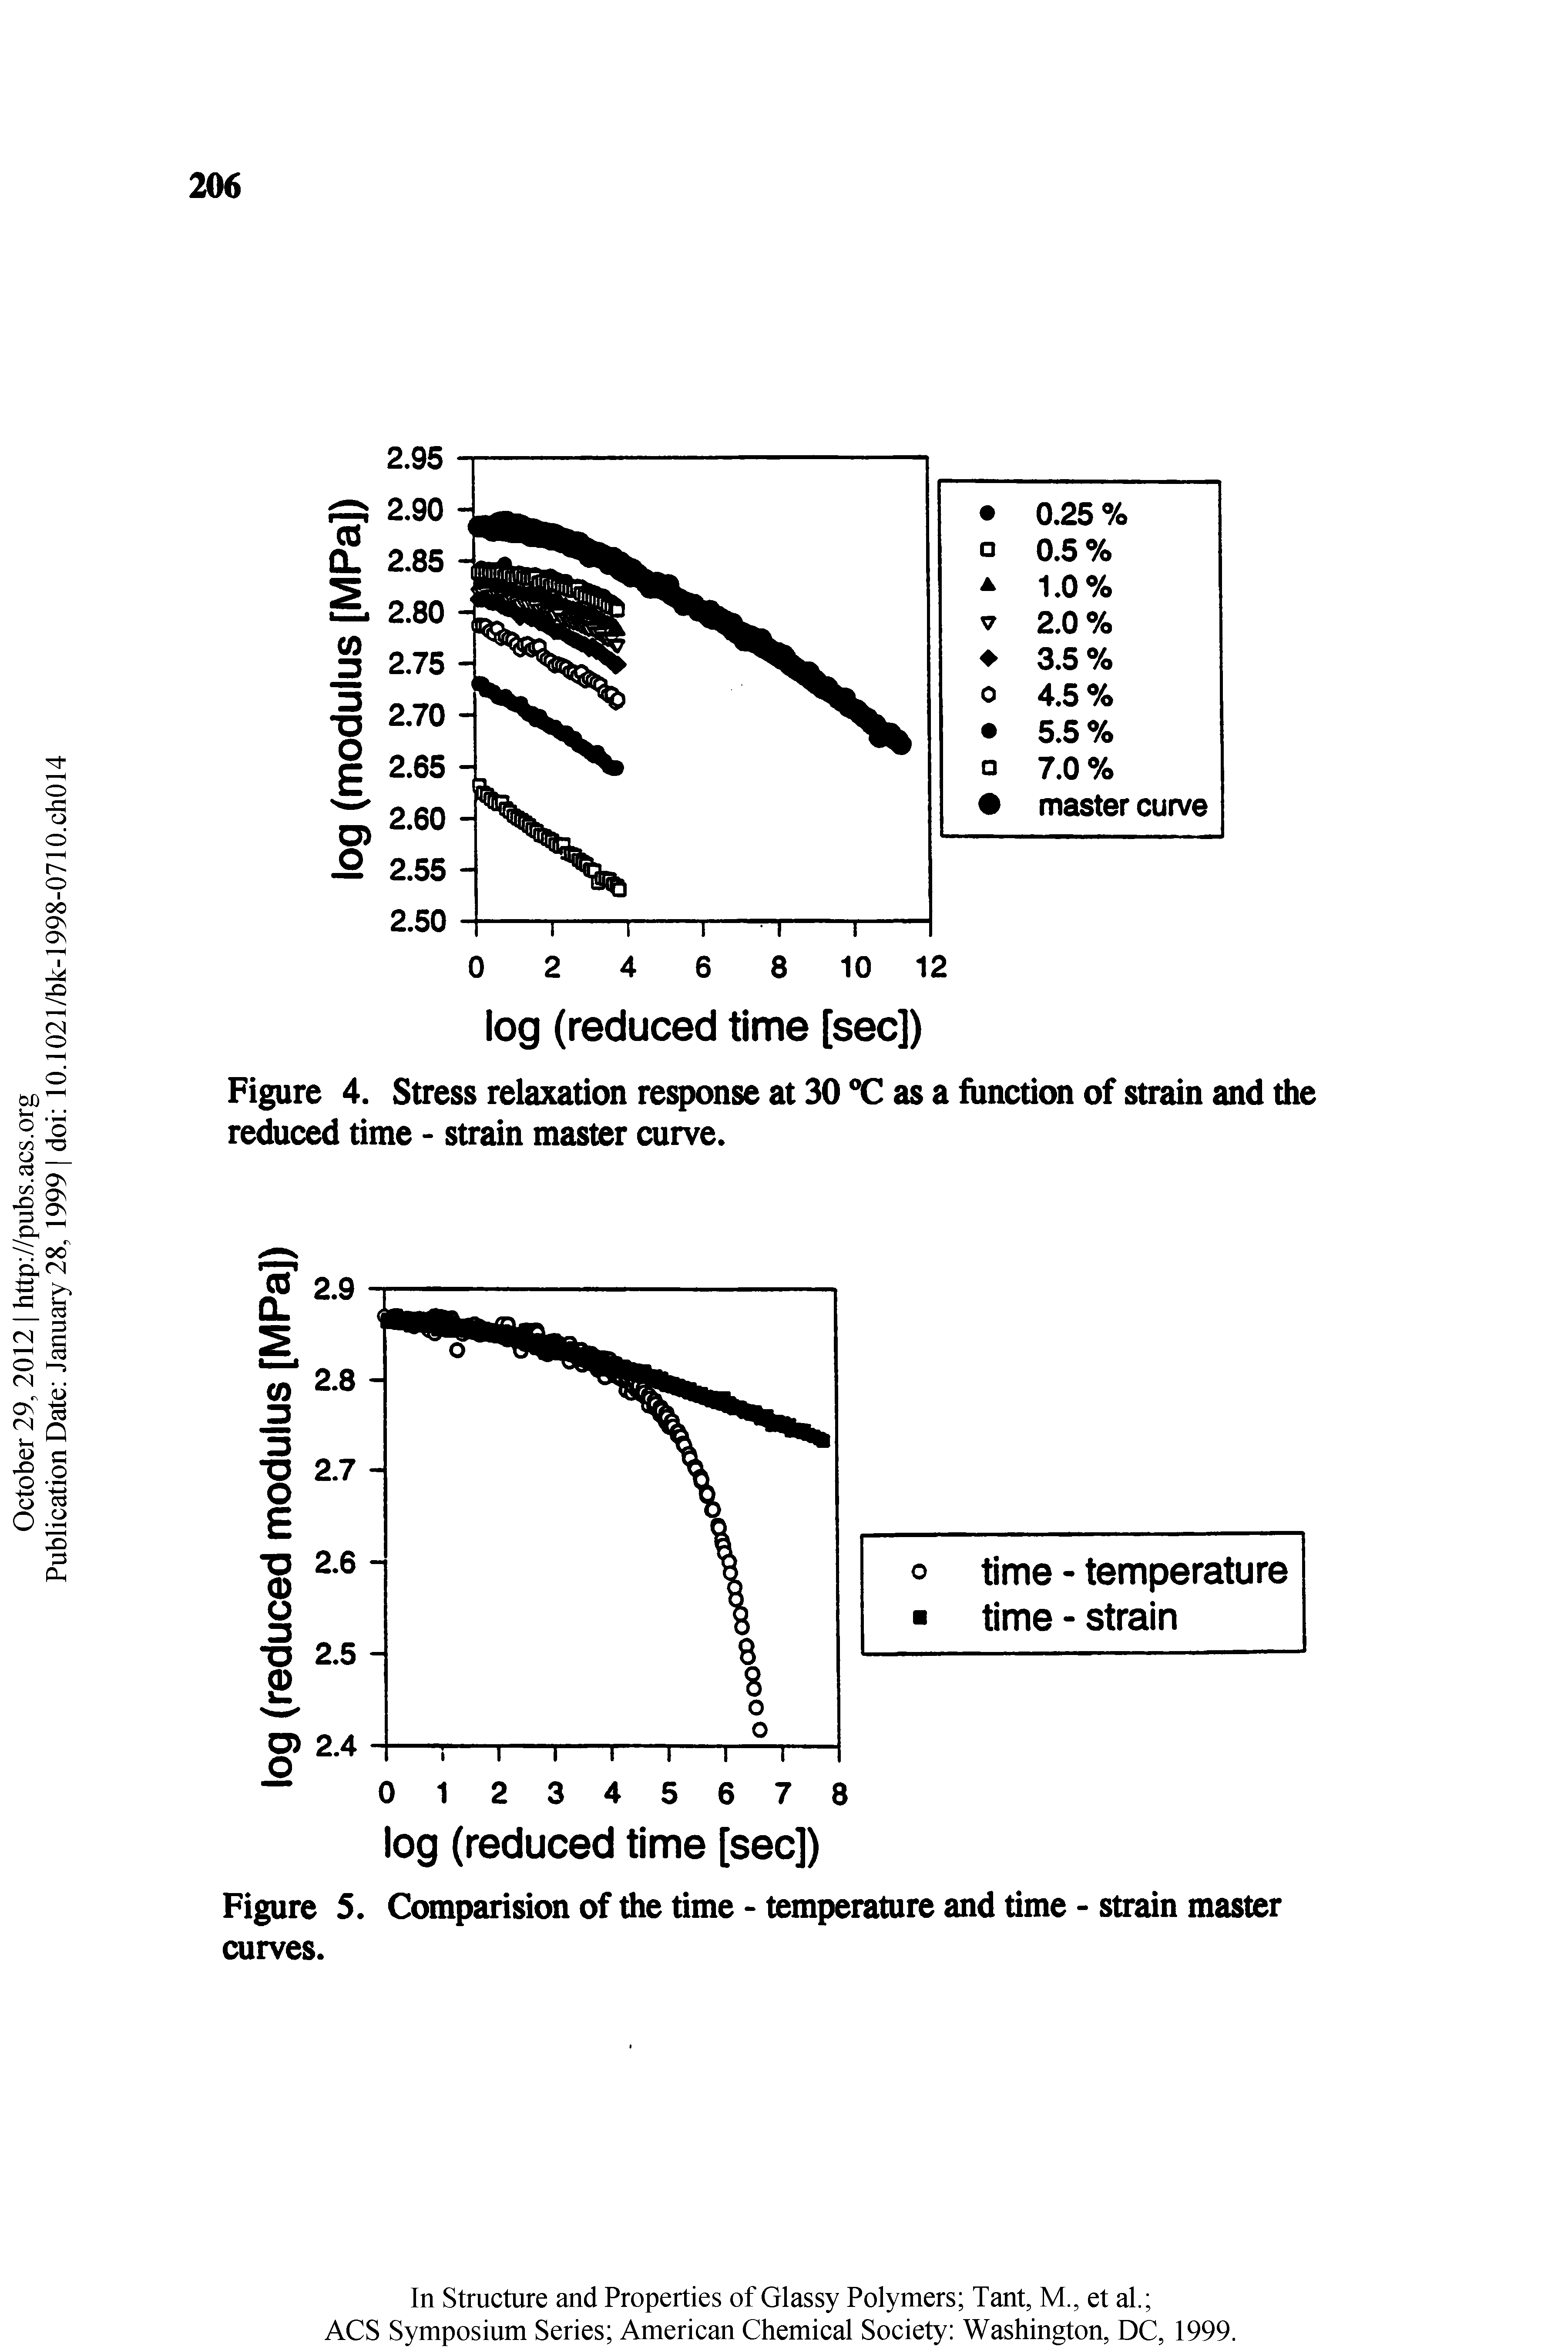 Figure 4. Stress relaxation response at 30 as a function of strain and the reduced time - strain master curve.